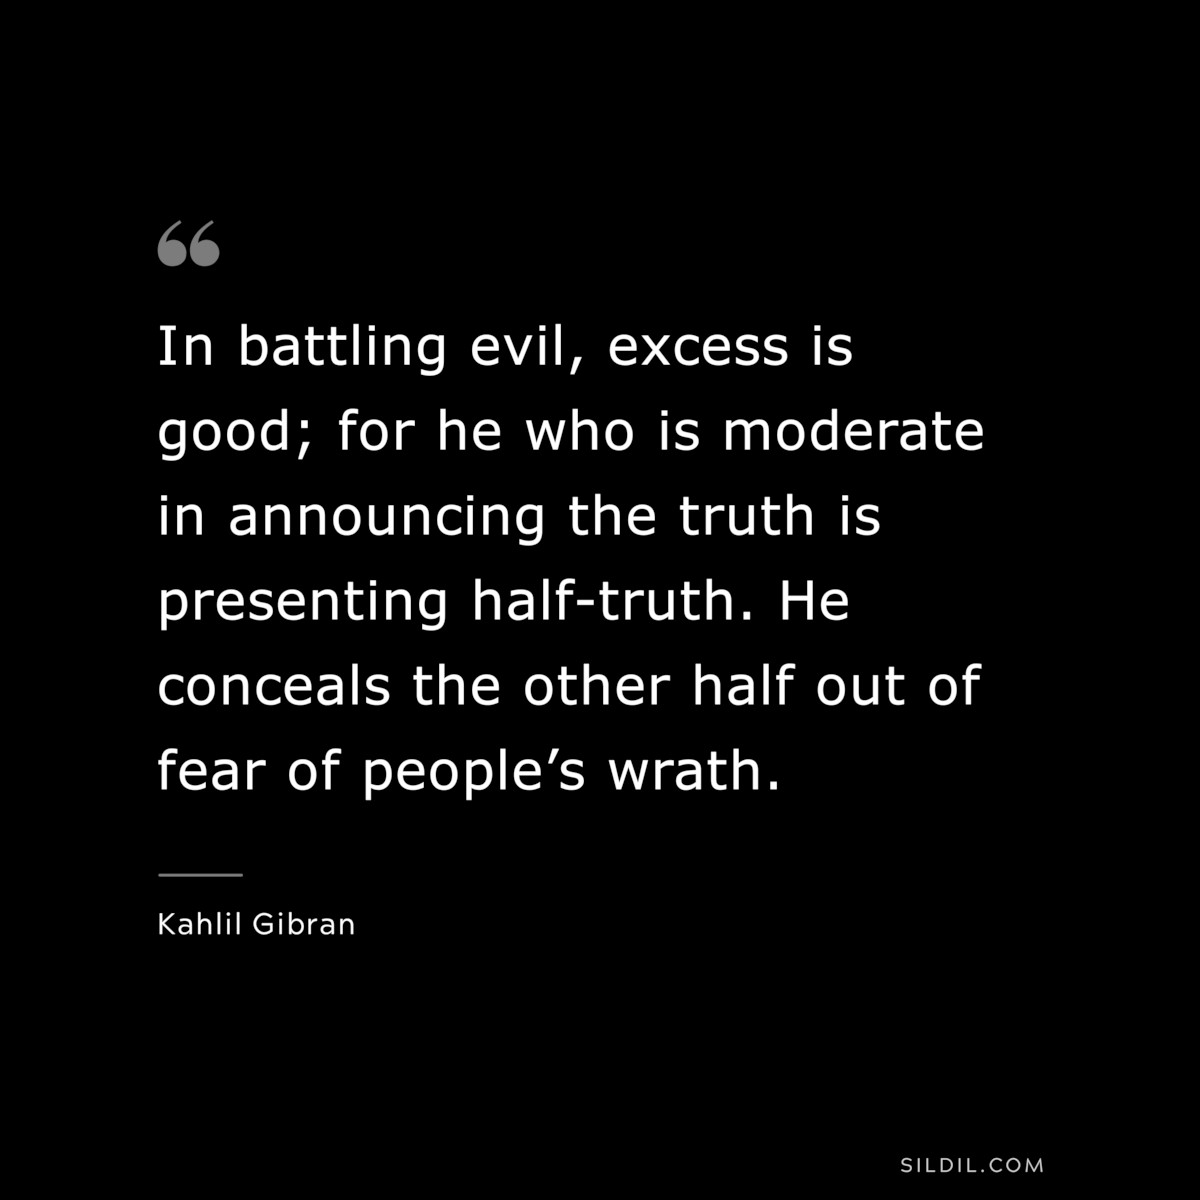 In battling evil, excess is good; for he who is moderate in announcing the truth is presenting half-truth. He conceals the other half out of fear of people’s wrath. ― Kahlil Gibran